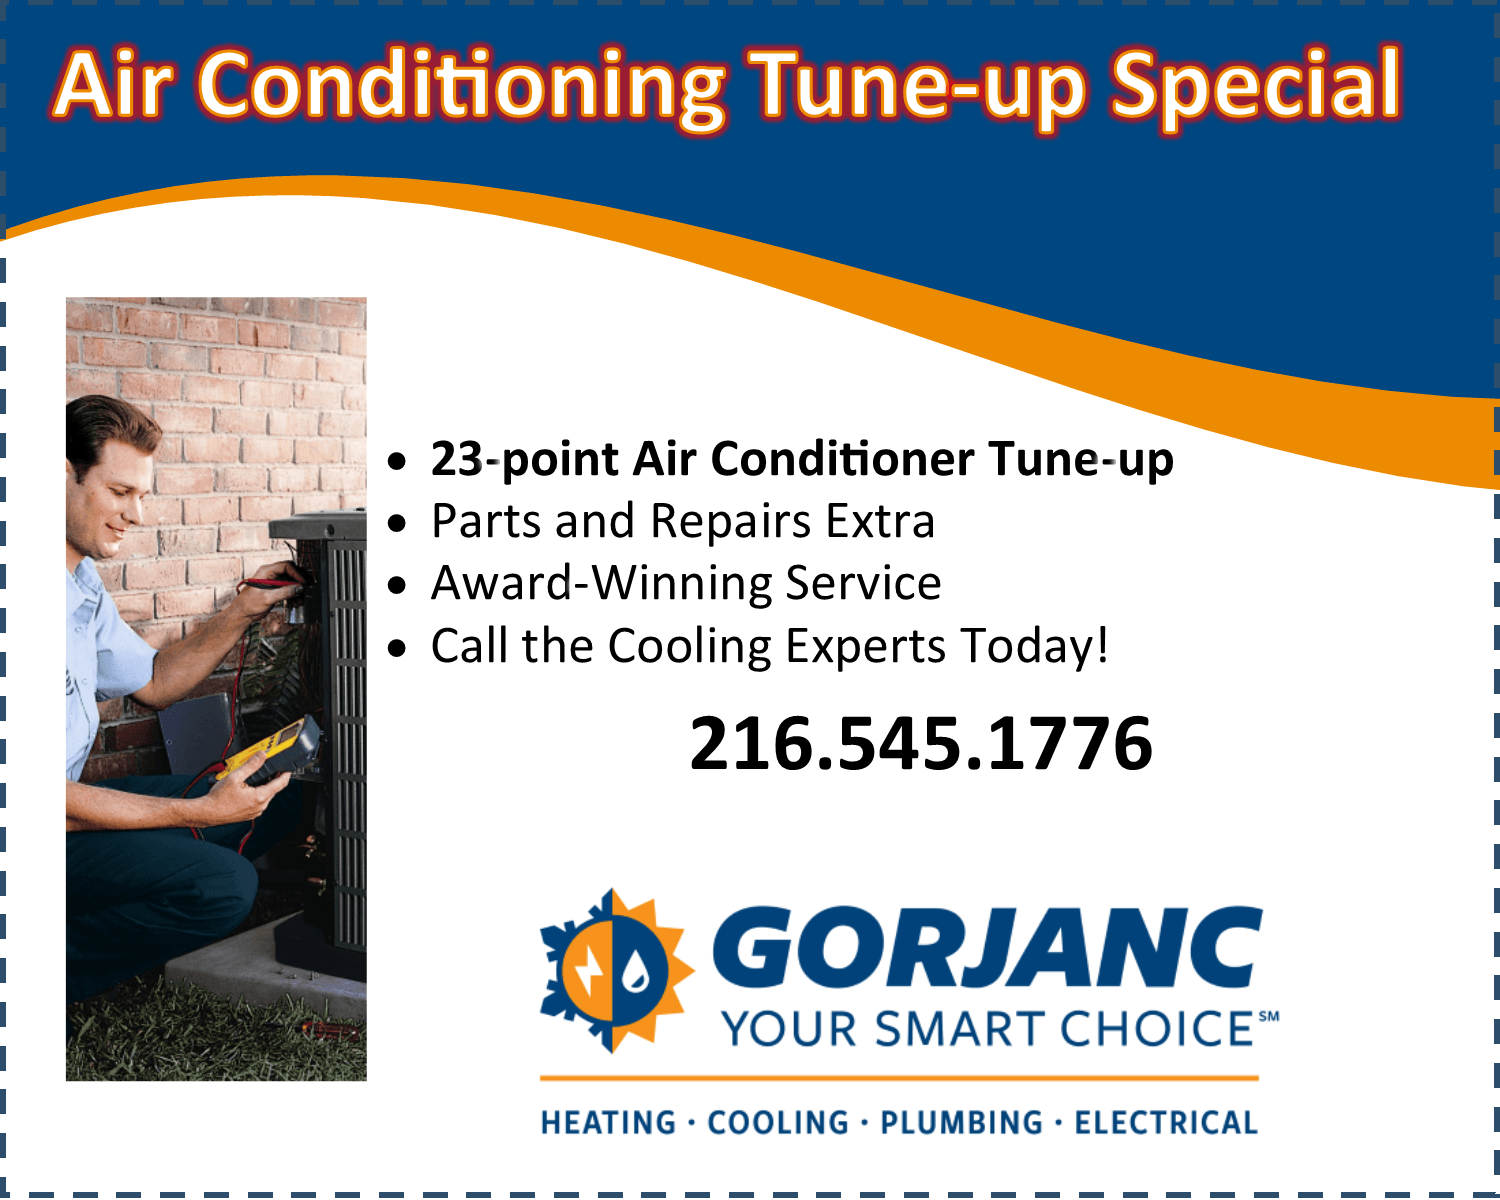 Gorjanc Air Conditioning Tune-Up Special